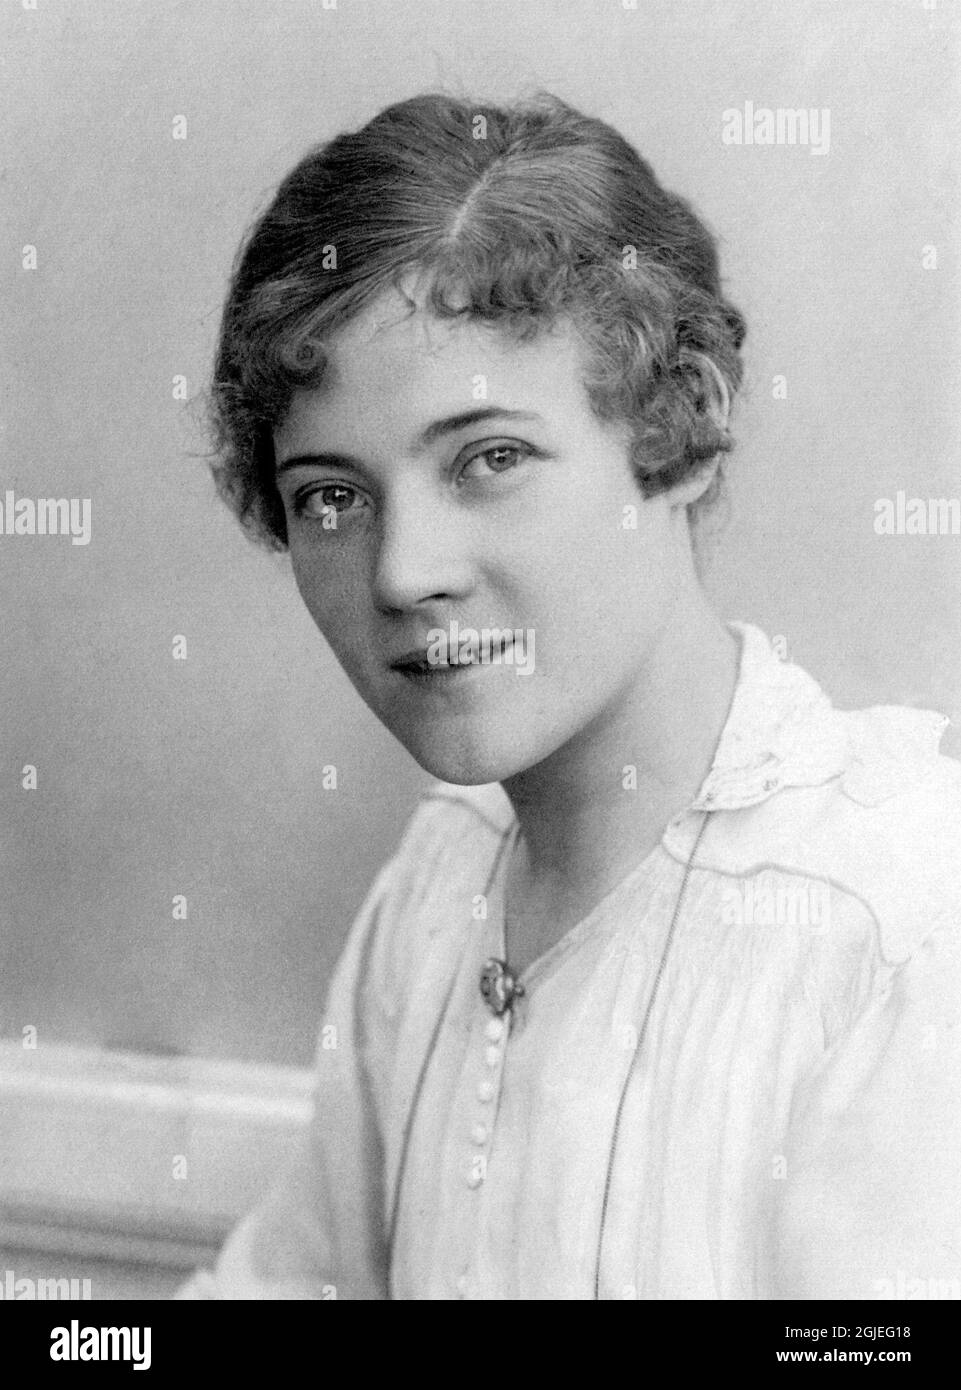 Lillie Ericson in Stockholm, Sweden  1916. An unknown child of Count Folke Bernadotte, closely related to the Swedish Royal family, has been revealed 60 years after his death. Count Bernadotte helped prisoners, mostly Scandinavian Jews, from the Nazi concentration camps during the end of WWII. He also engaged in the Israeli/Palestine conflict and was assassinated by the Israeli separatist organization Stern, 60 years ago in September 17, 1948. In the 1920th Count Bernadotte fell in love with one of the young actress, Lillie Ericsson, the star of a local theatre in Stockholm, who gave birth to  Stock Photo